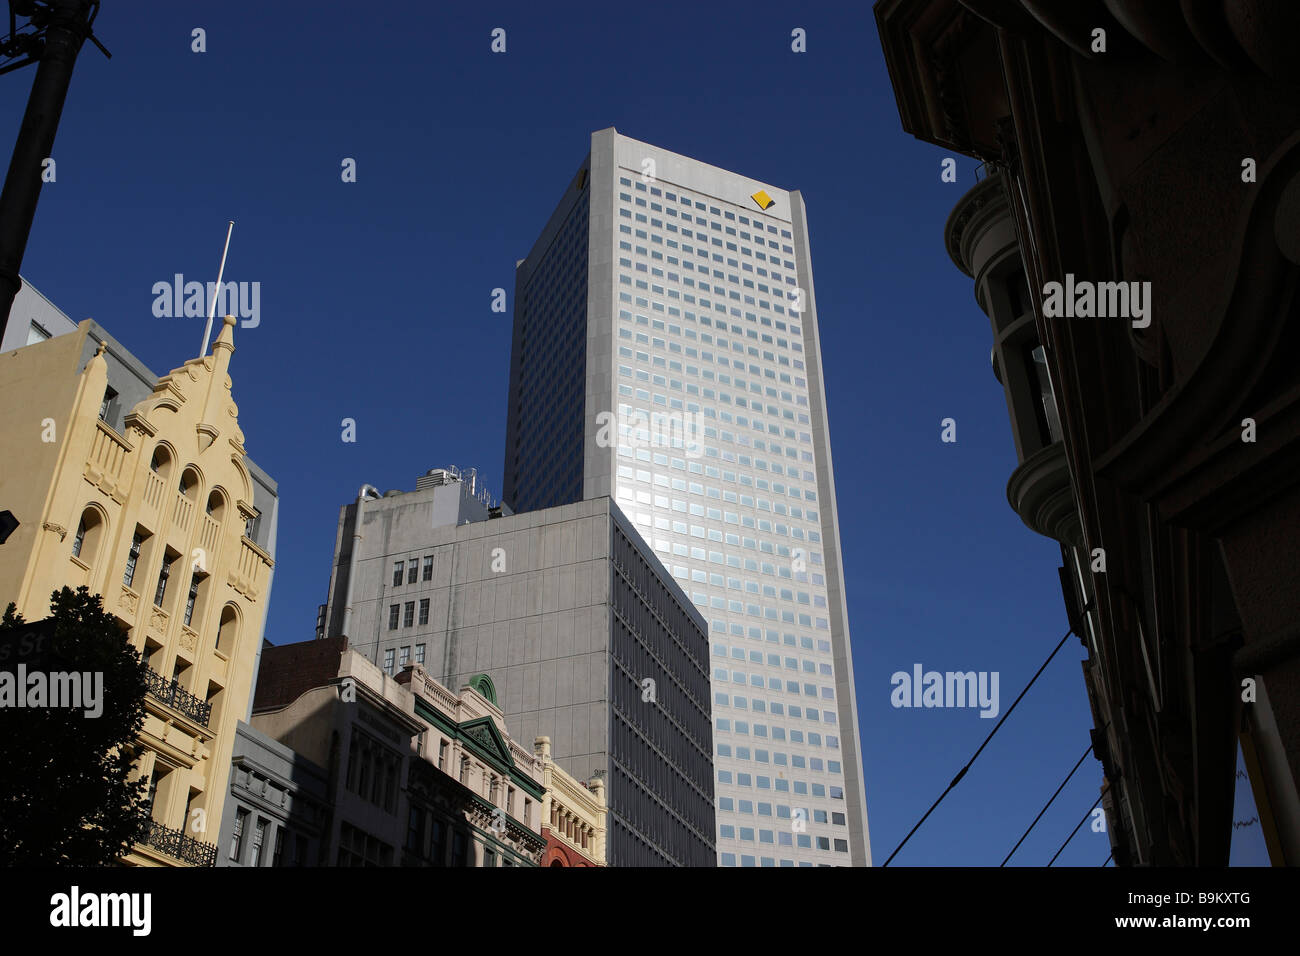 Commonwealth Bank Headquarters building with logo in Melbourne,Australia Stock Photo